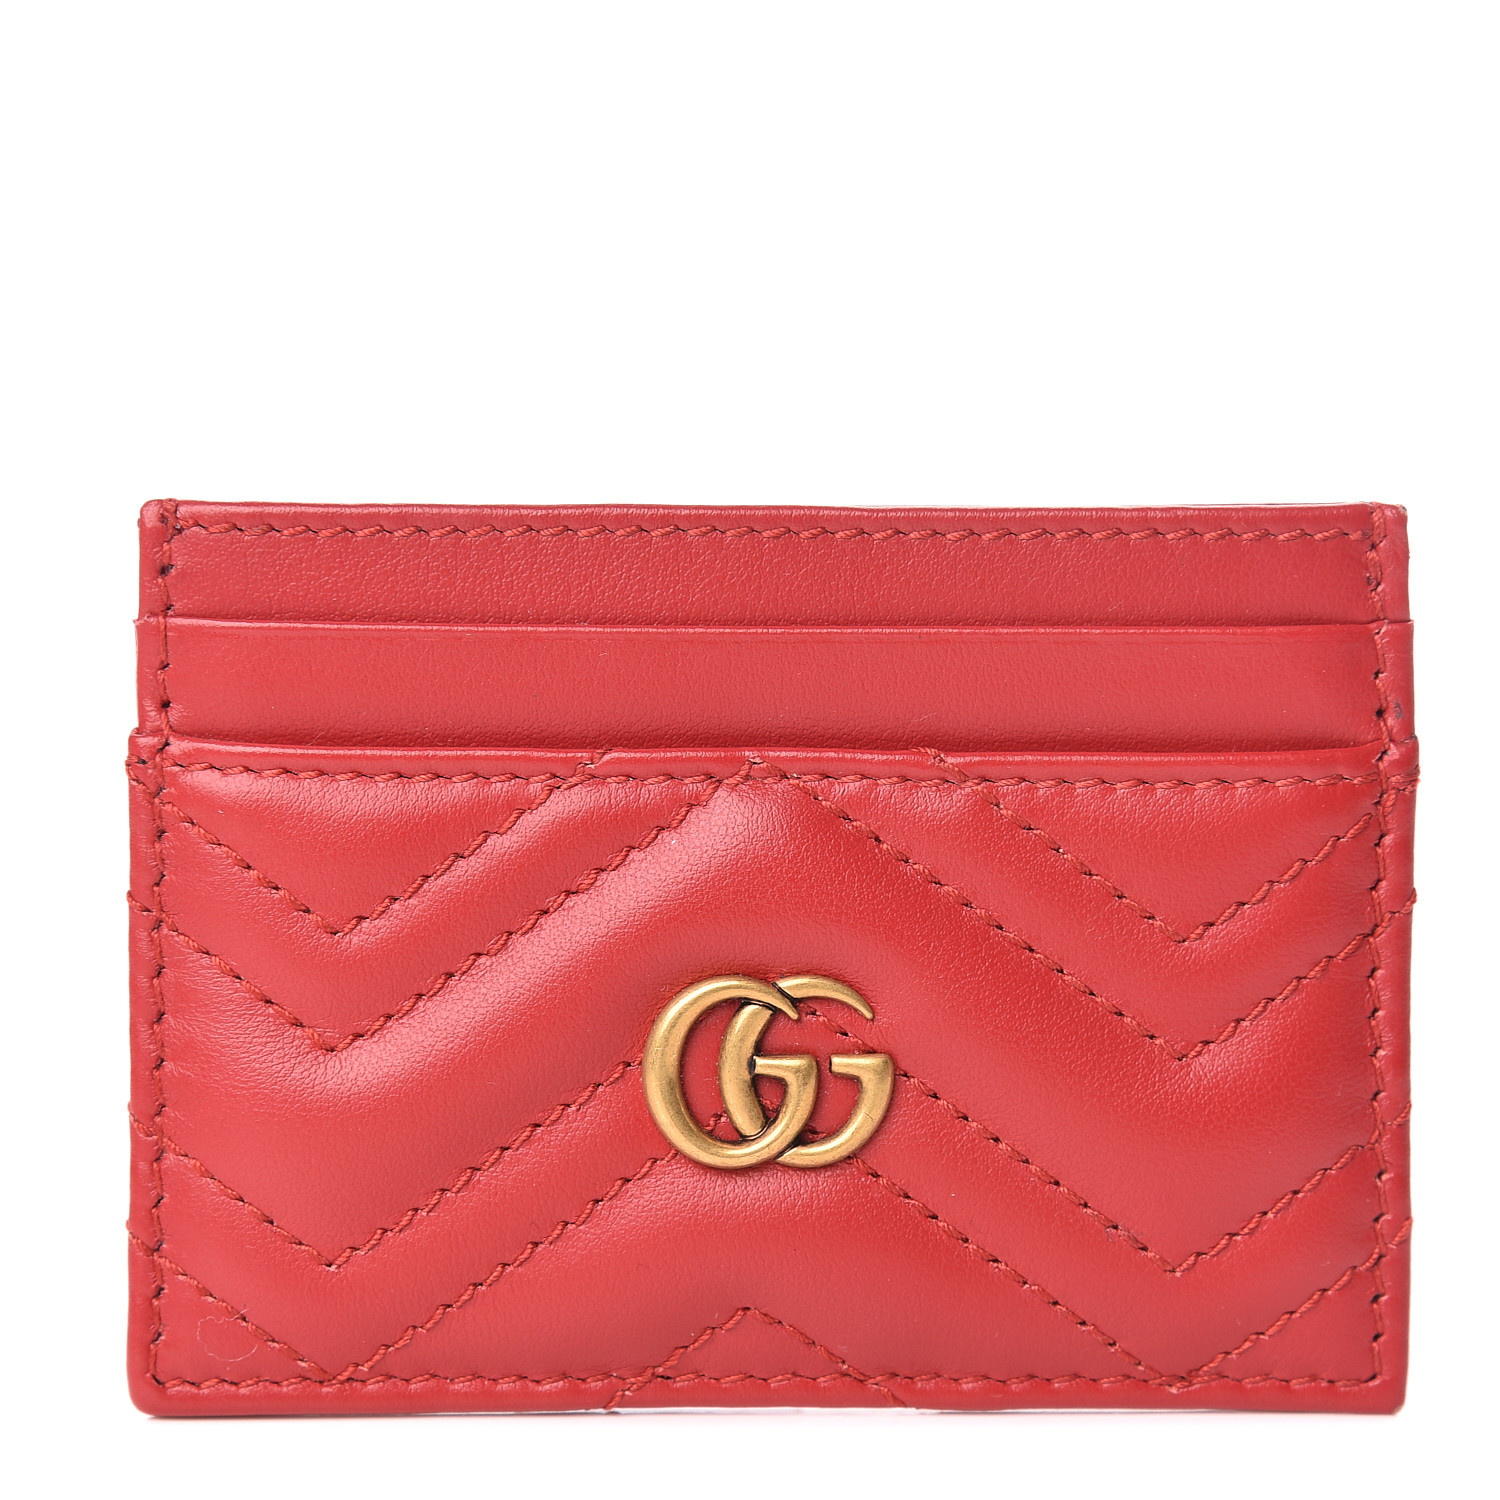 GUCCI Calfskin Matelasse GG Marmont Card Holder Hibiscus Red 469393